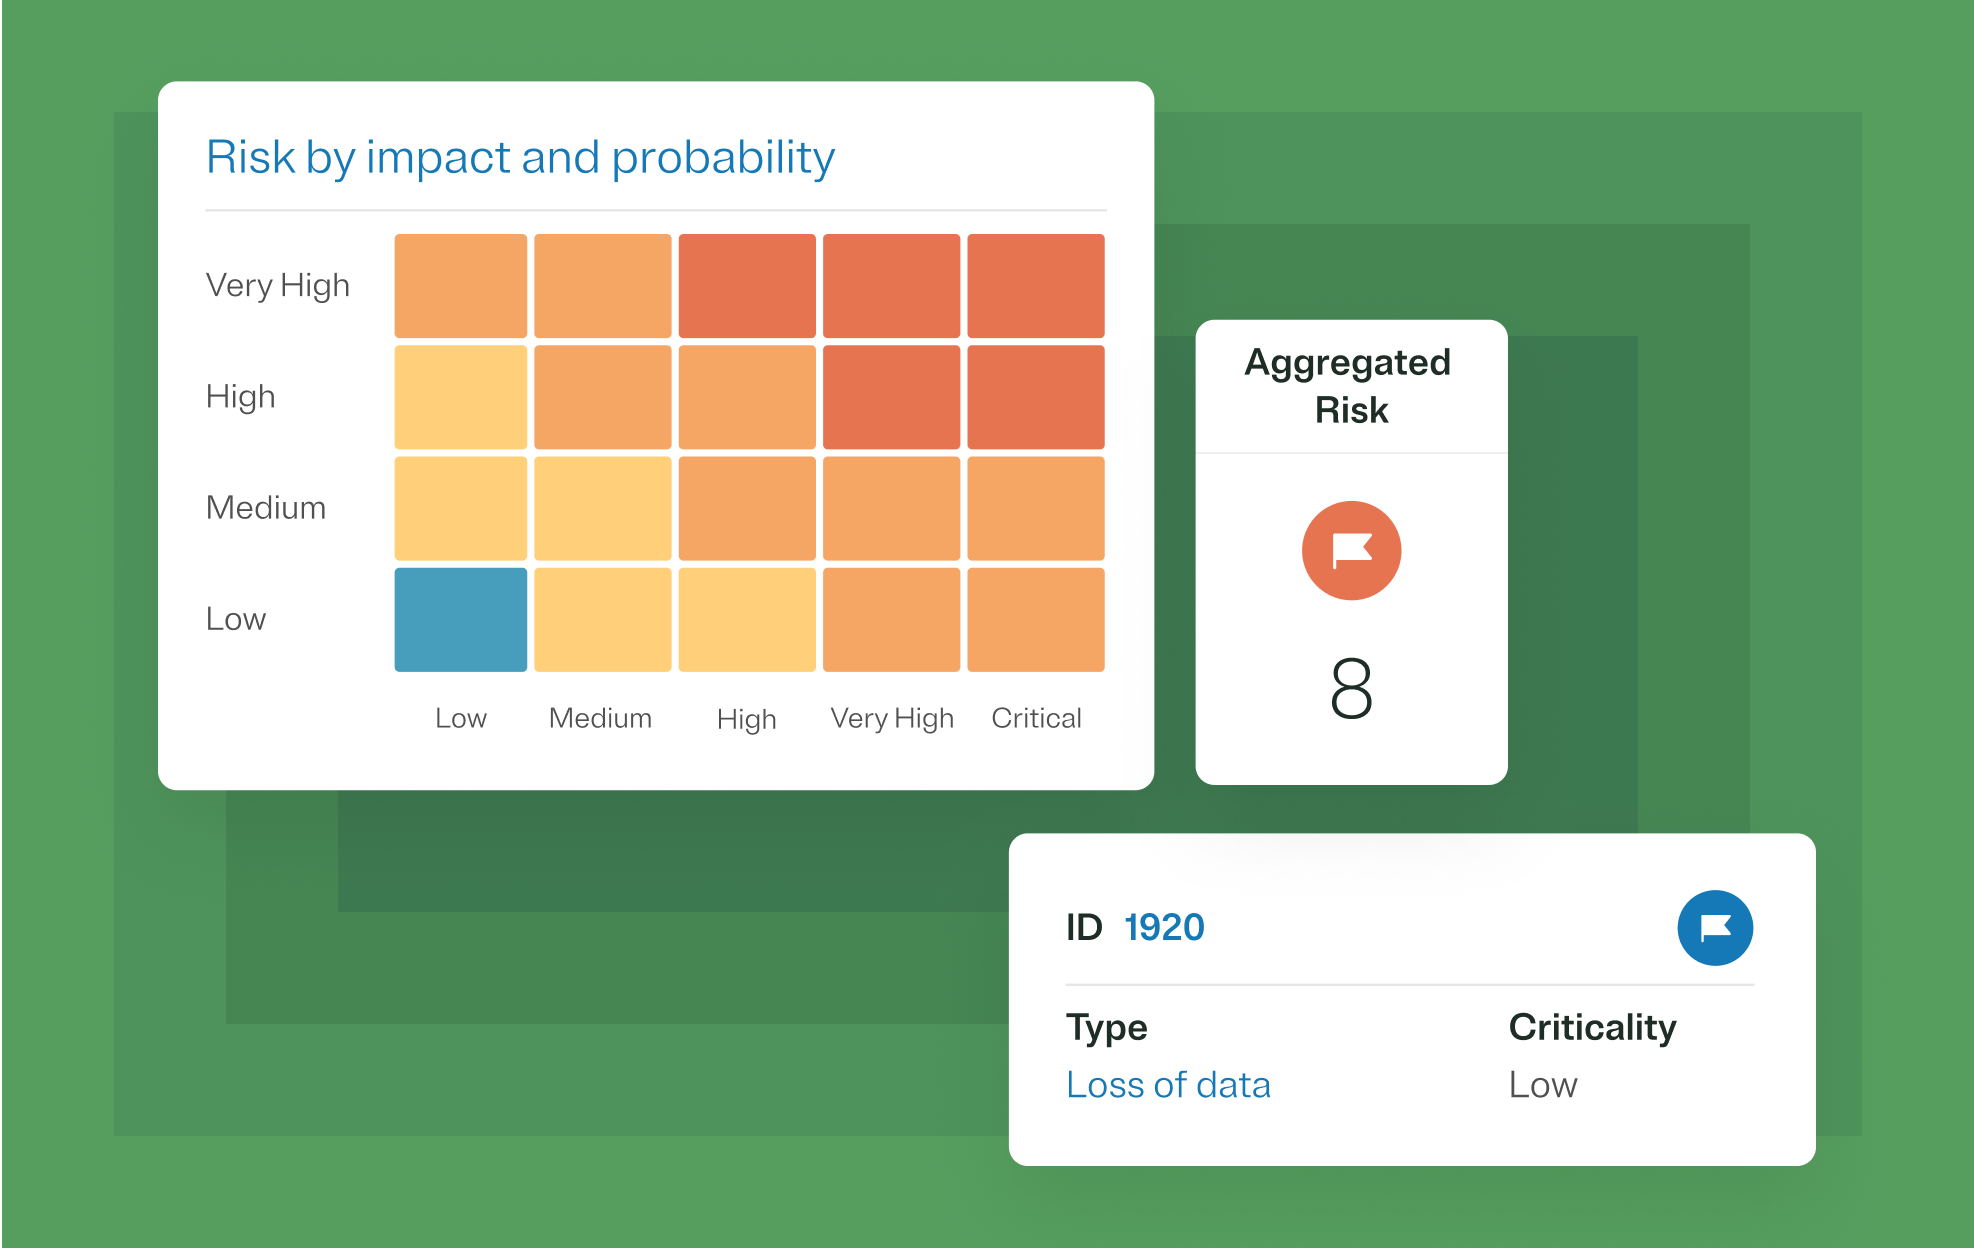 Graphic showcasing IT and Security Risk Management dashboard metrics, including data mapping of risk impact and probability, as well as aggregated risk calculation